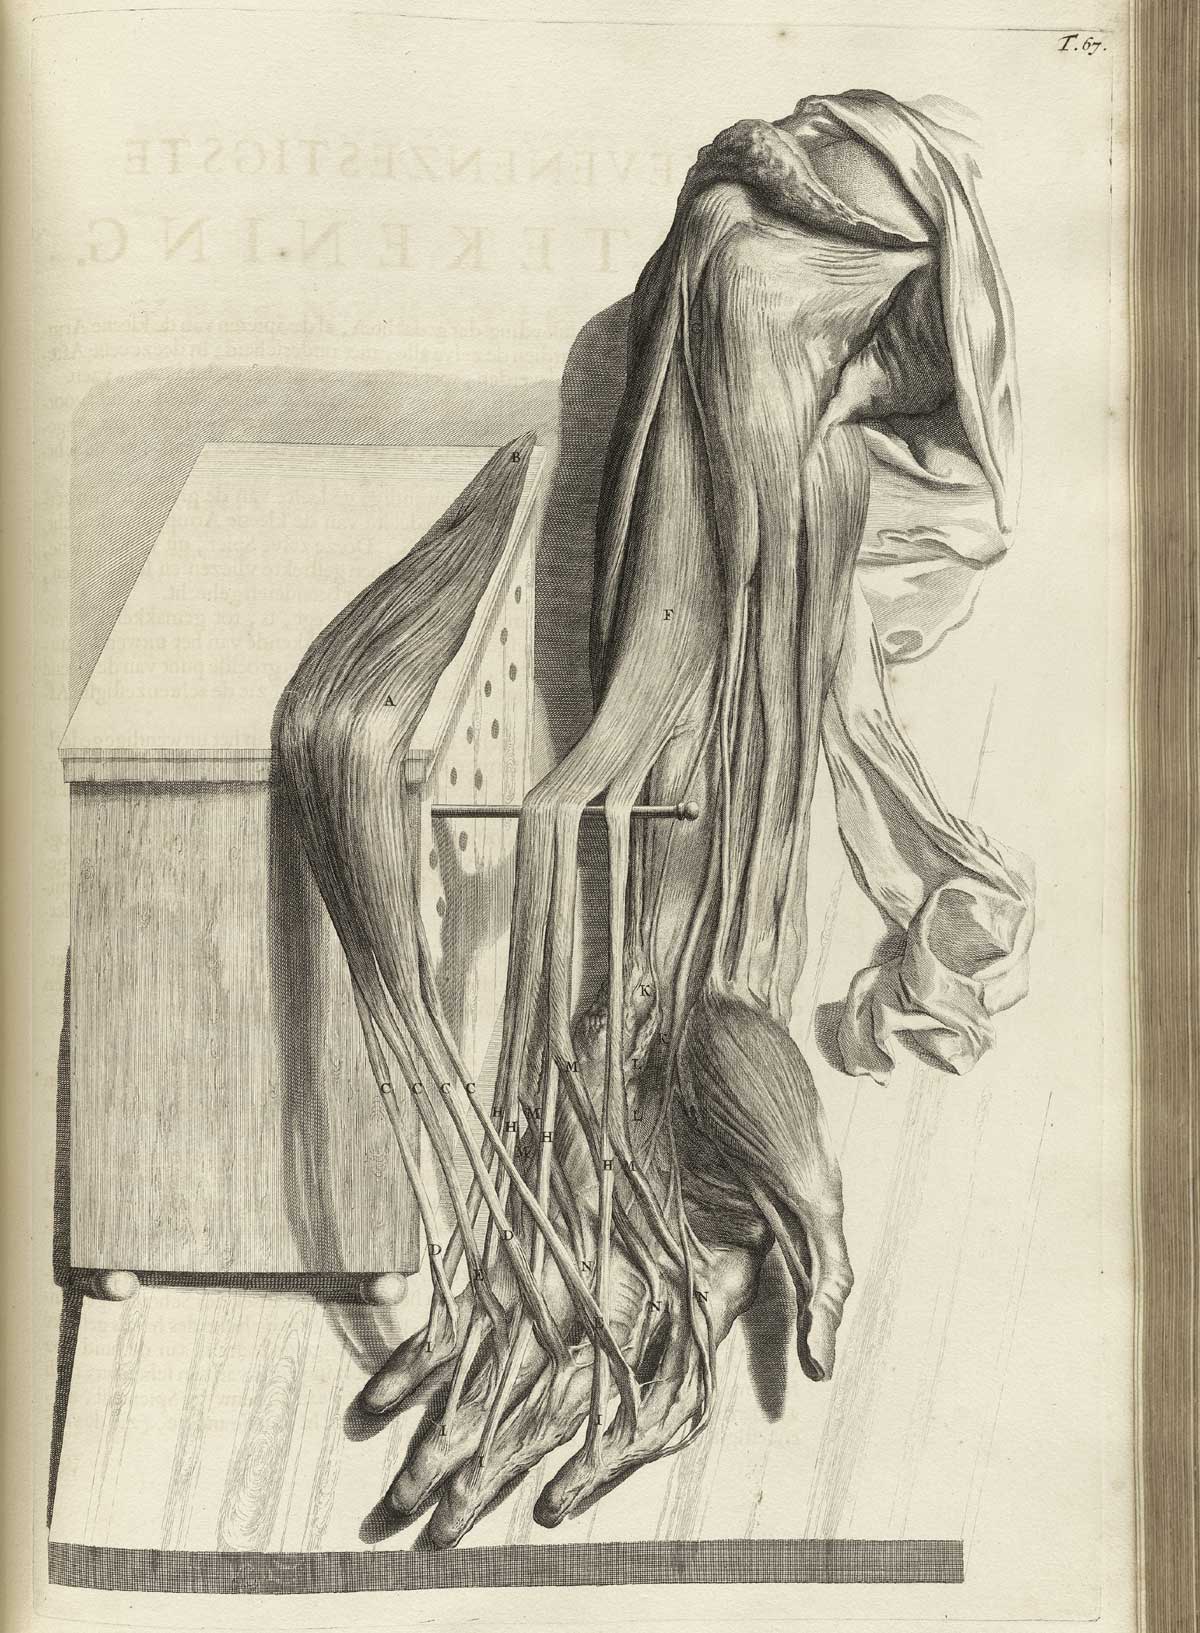 Engraving of a dissected hand with muscles and sinews of the front forearm and palm separated for a detailed view; the forearm and had are laying in a downward direction and leaning against a wooden box; from Govard Bidloo’s Ontleding Des Menschelyken Lichaams, Amsterdam, 1690, NLM Call no. WZ 250 B5855anDu 1690.